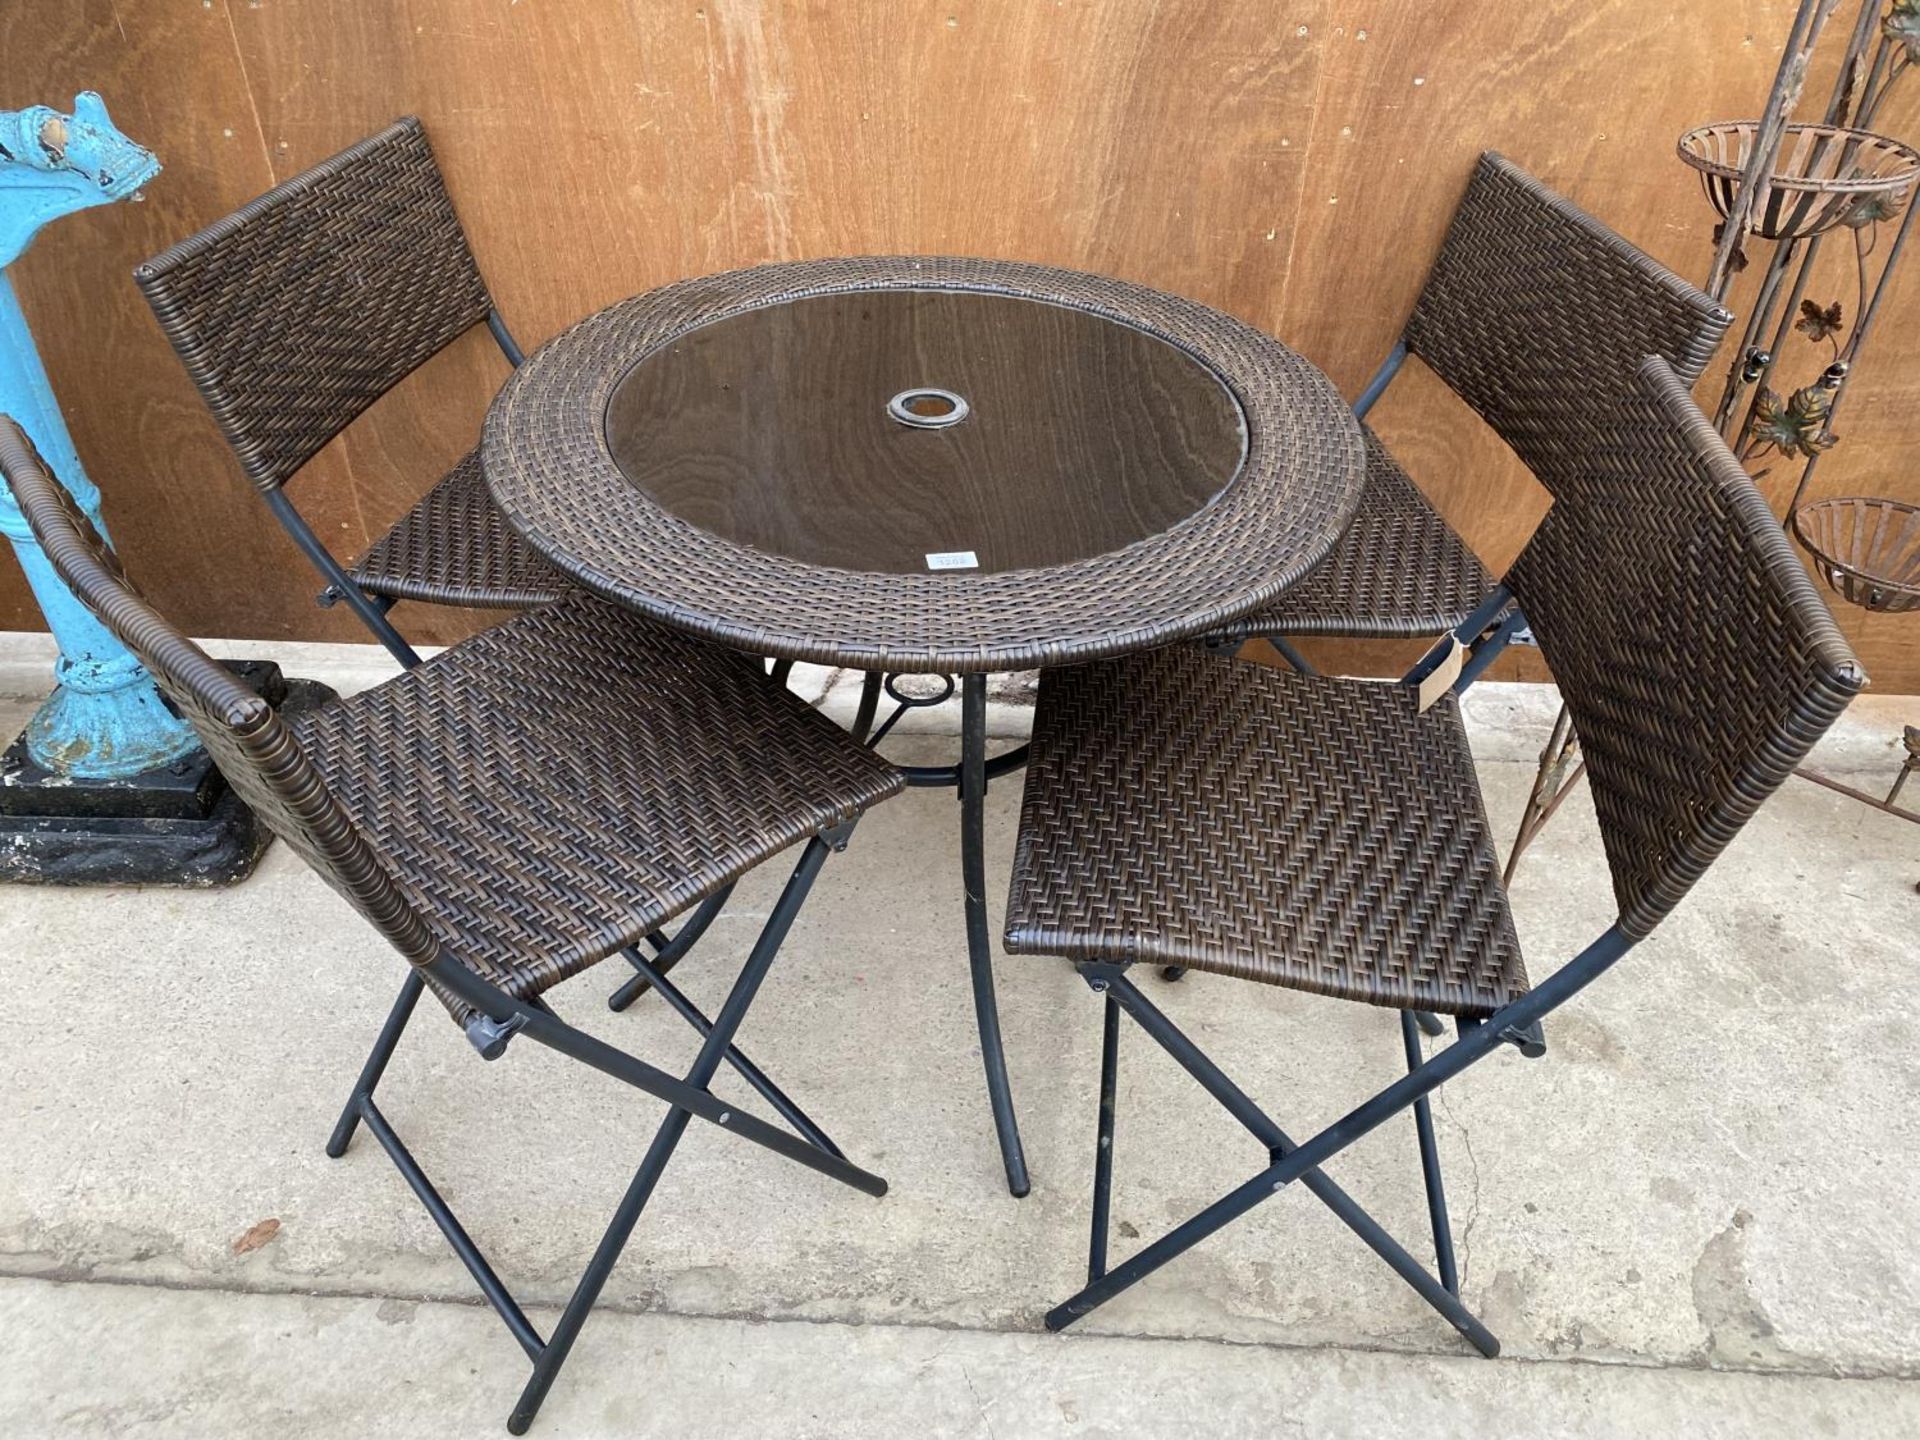 A RATTAN FIVE PIECE BISTRO SET TO INCLUDE ROUND TABLE AND FOUR CHAIRS